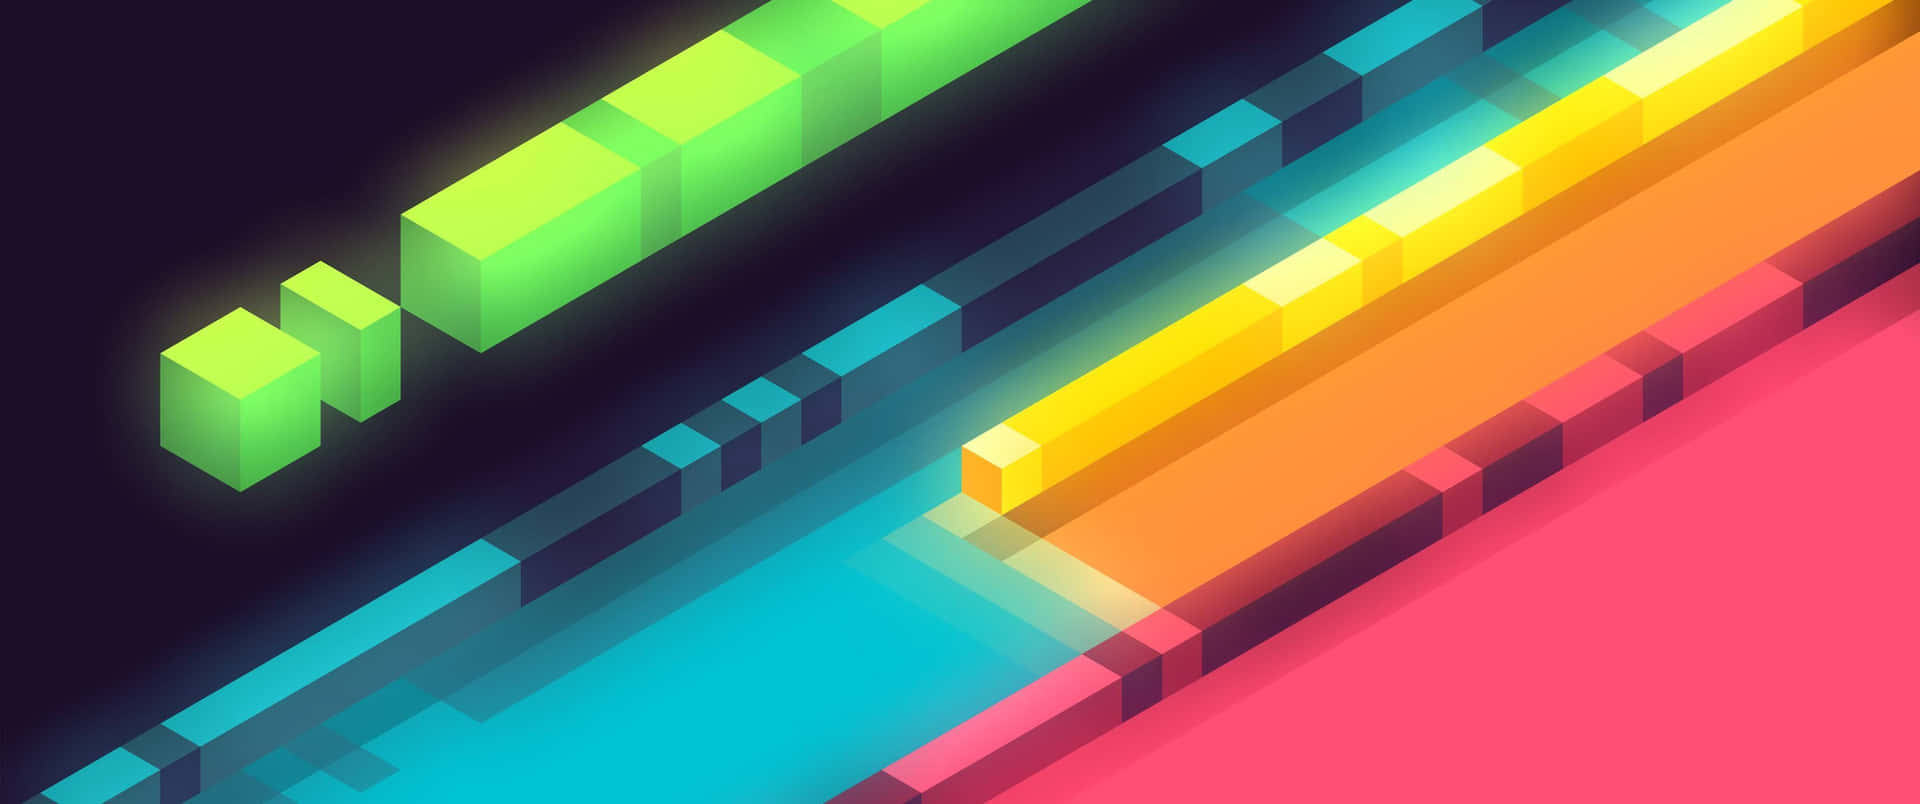 3440x1440p Cube Abstract Background Design